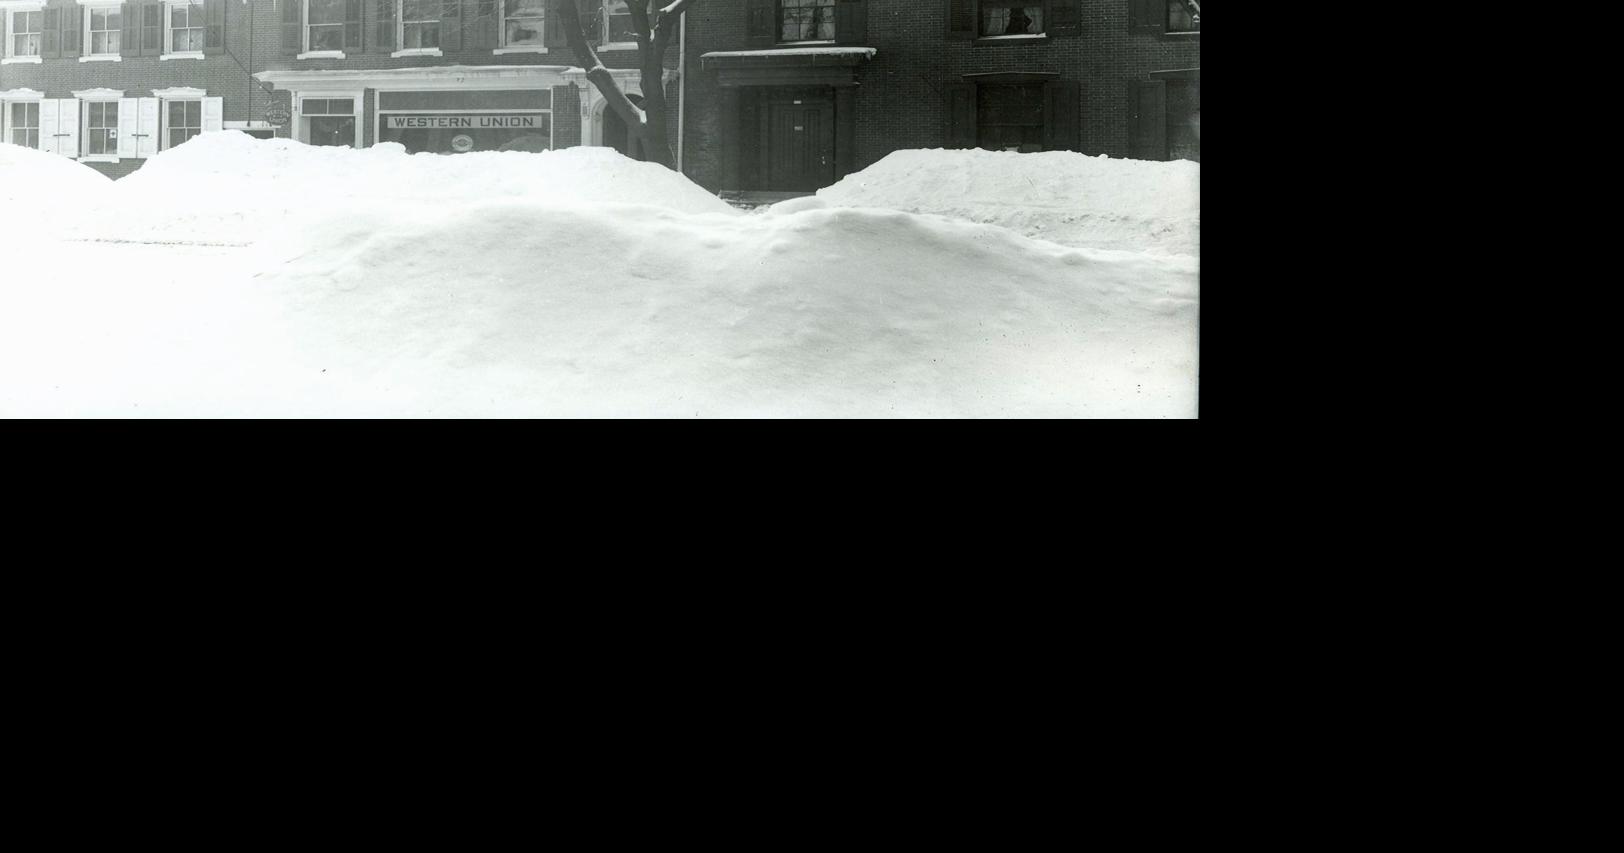 Tour roofs Through Blizzard Time: and ago century Carlisle collapsed a buried